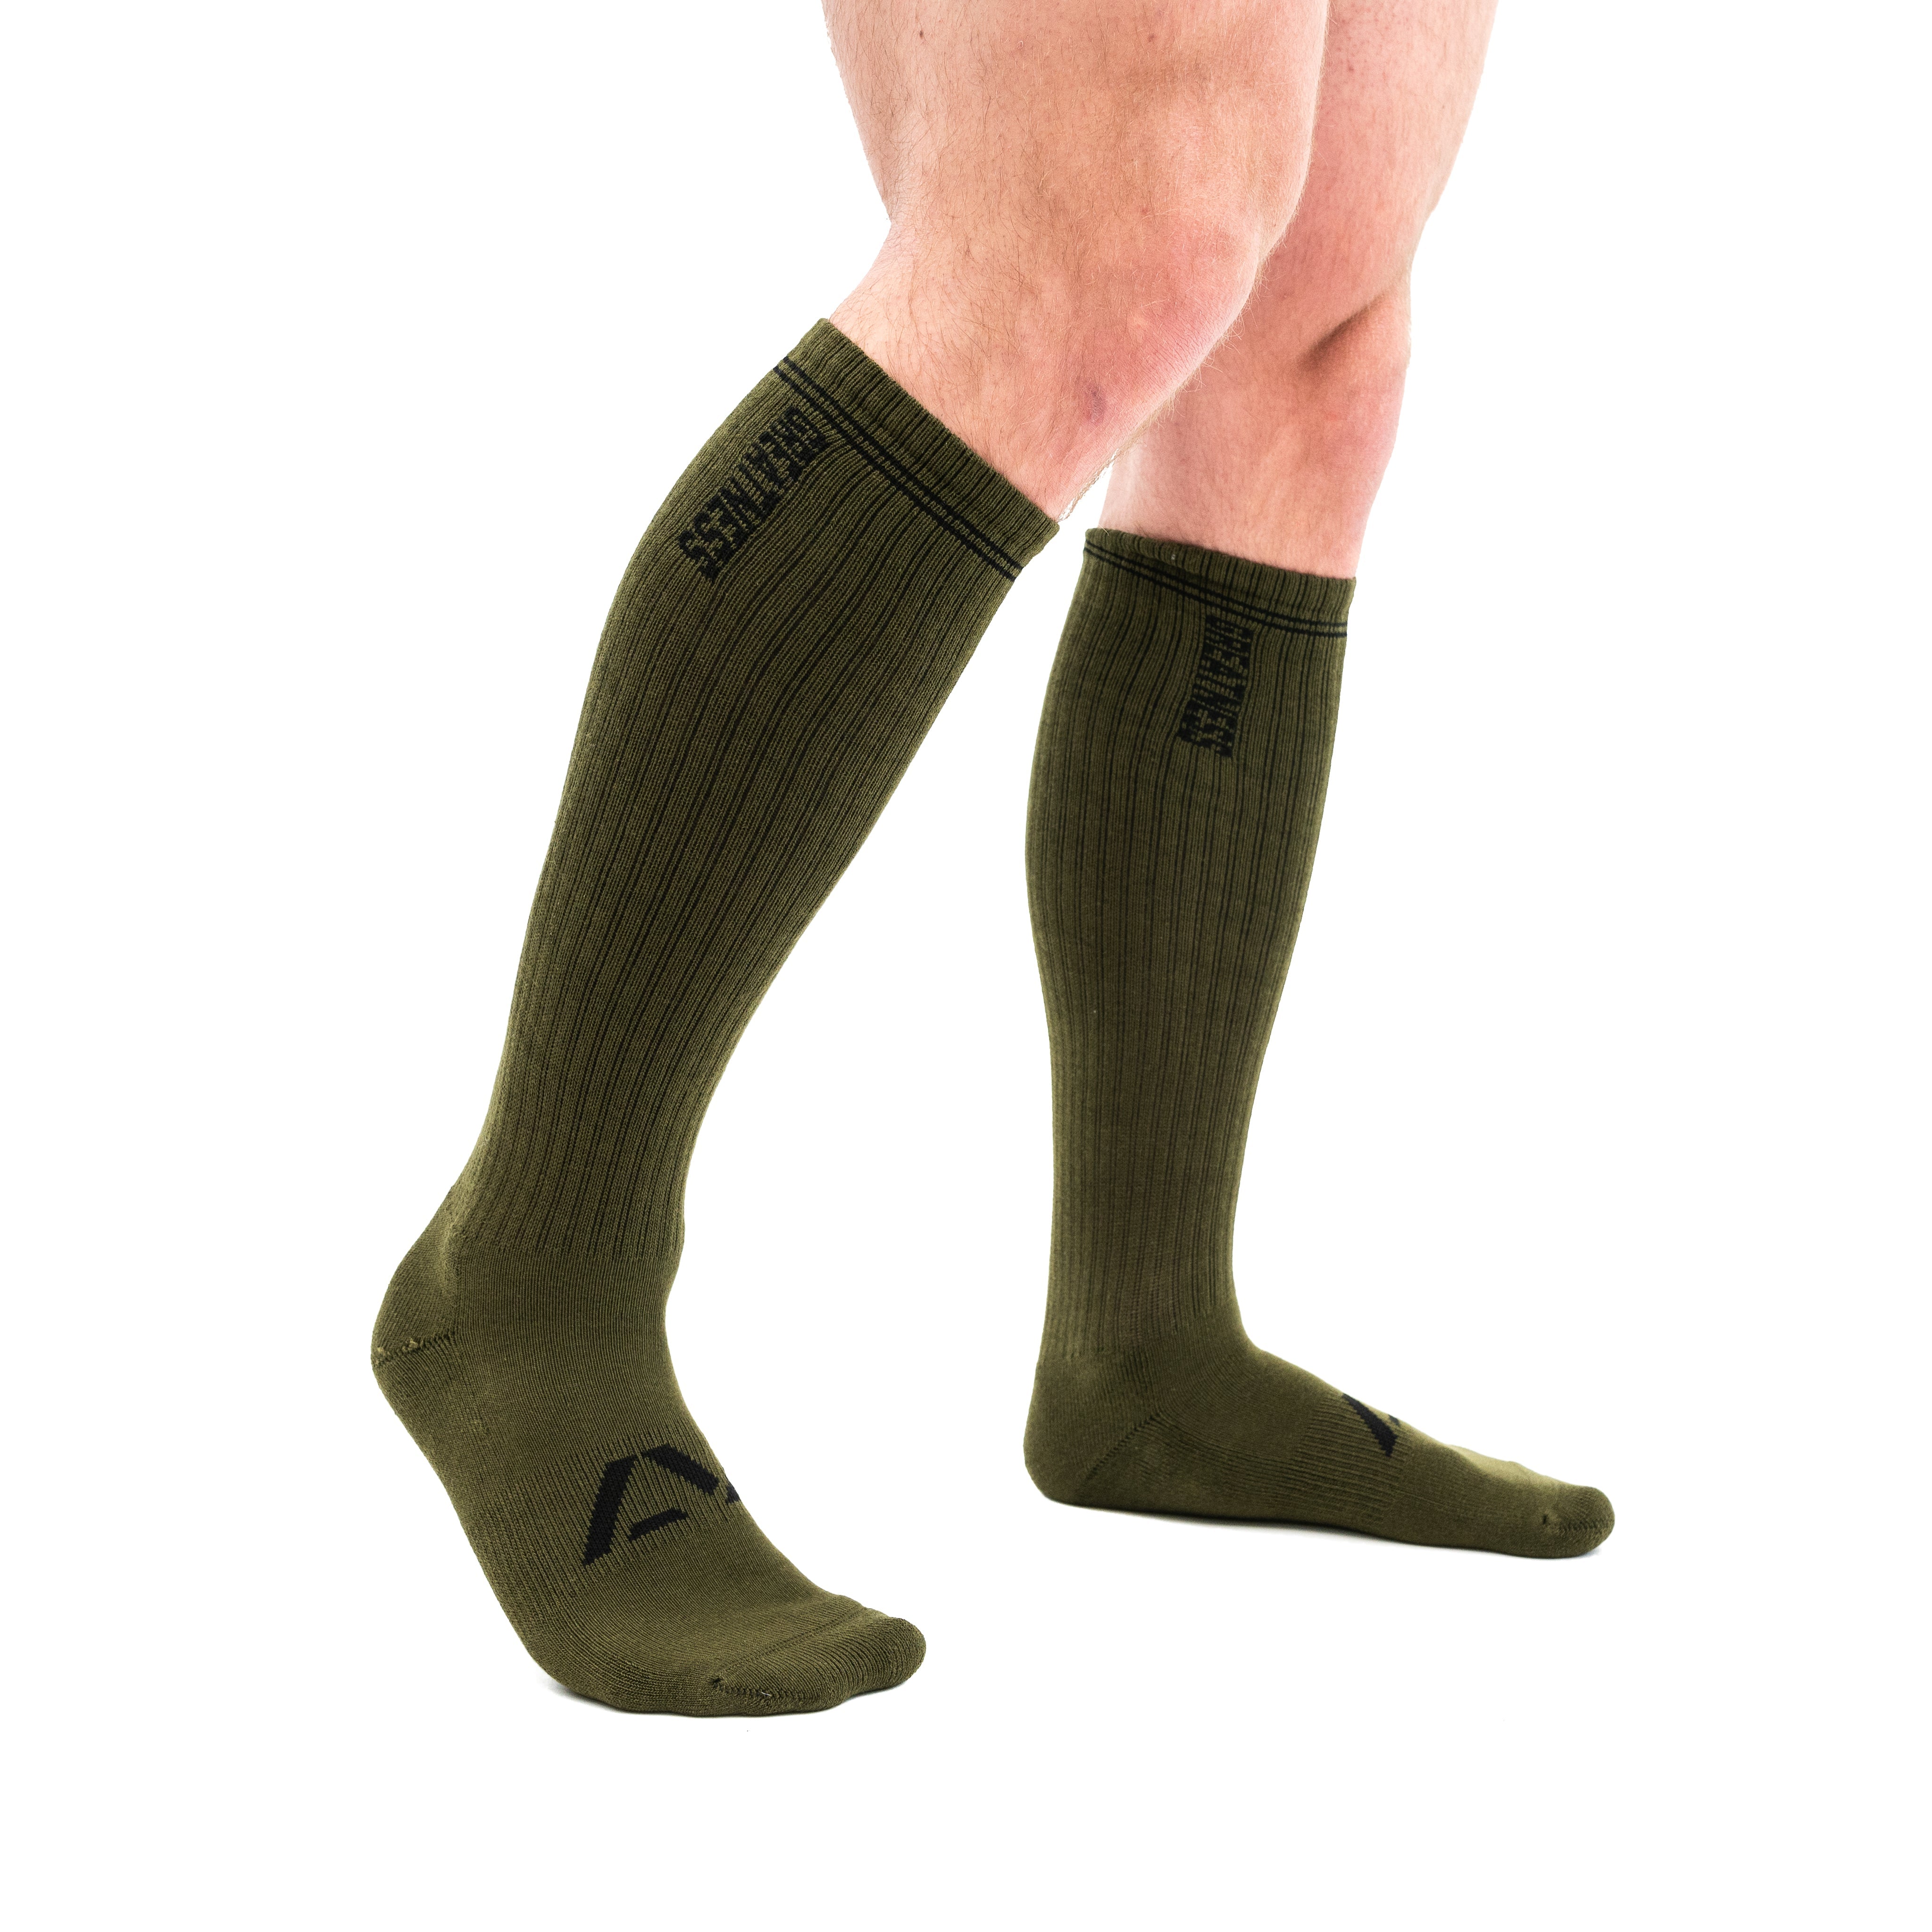 Your feet are important and durable deadlift socks are just as importing when doing SBD. These deadlift socks have compression benefits and arch support as well as being IPF Approved with their IPF approved logo. These deadlift socks are perfect for Powerlifting, weightlifting, strongman and all your strength sports needs. The perfect sock for your IPF Approved Kit. Shipping to Europe and the UK, Norway, Switzerland and Iceland.